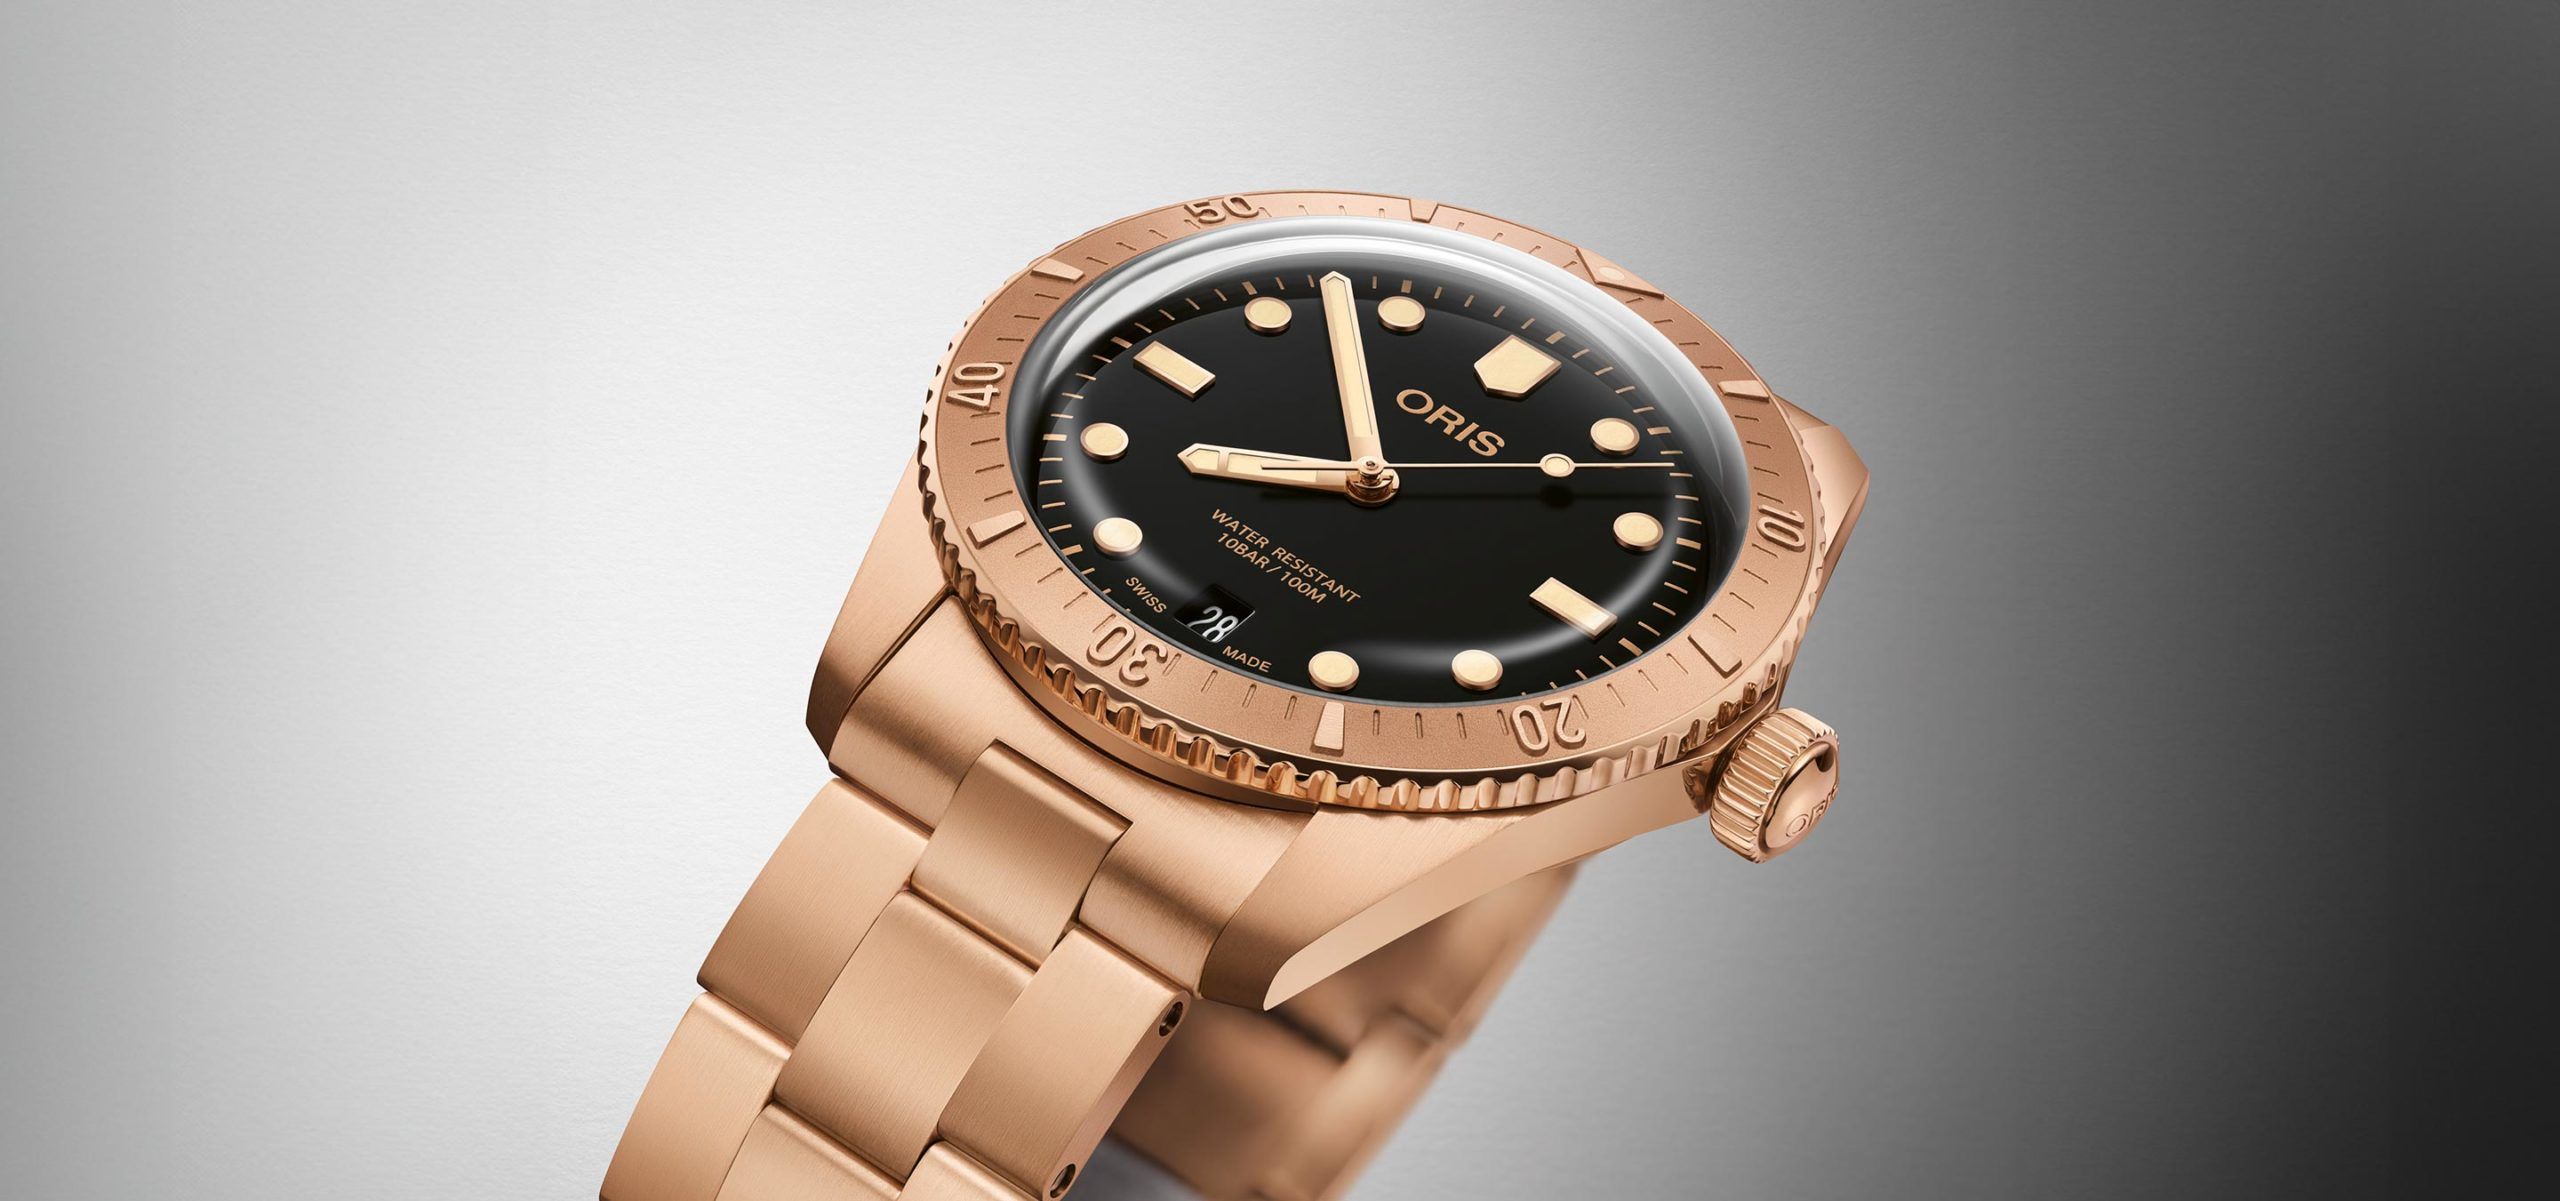 Dive Into The Warmth Of Sepia Tones: Meet The Oris Divers Sixty-Five Cotton Candy Sepia